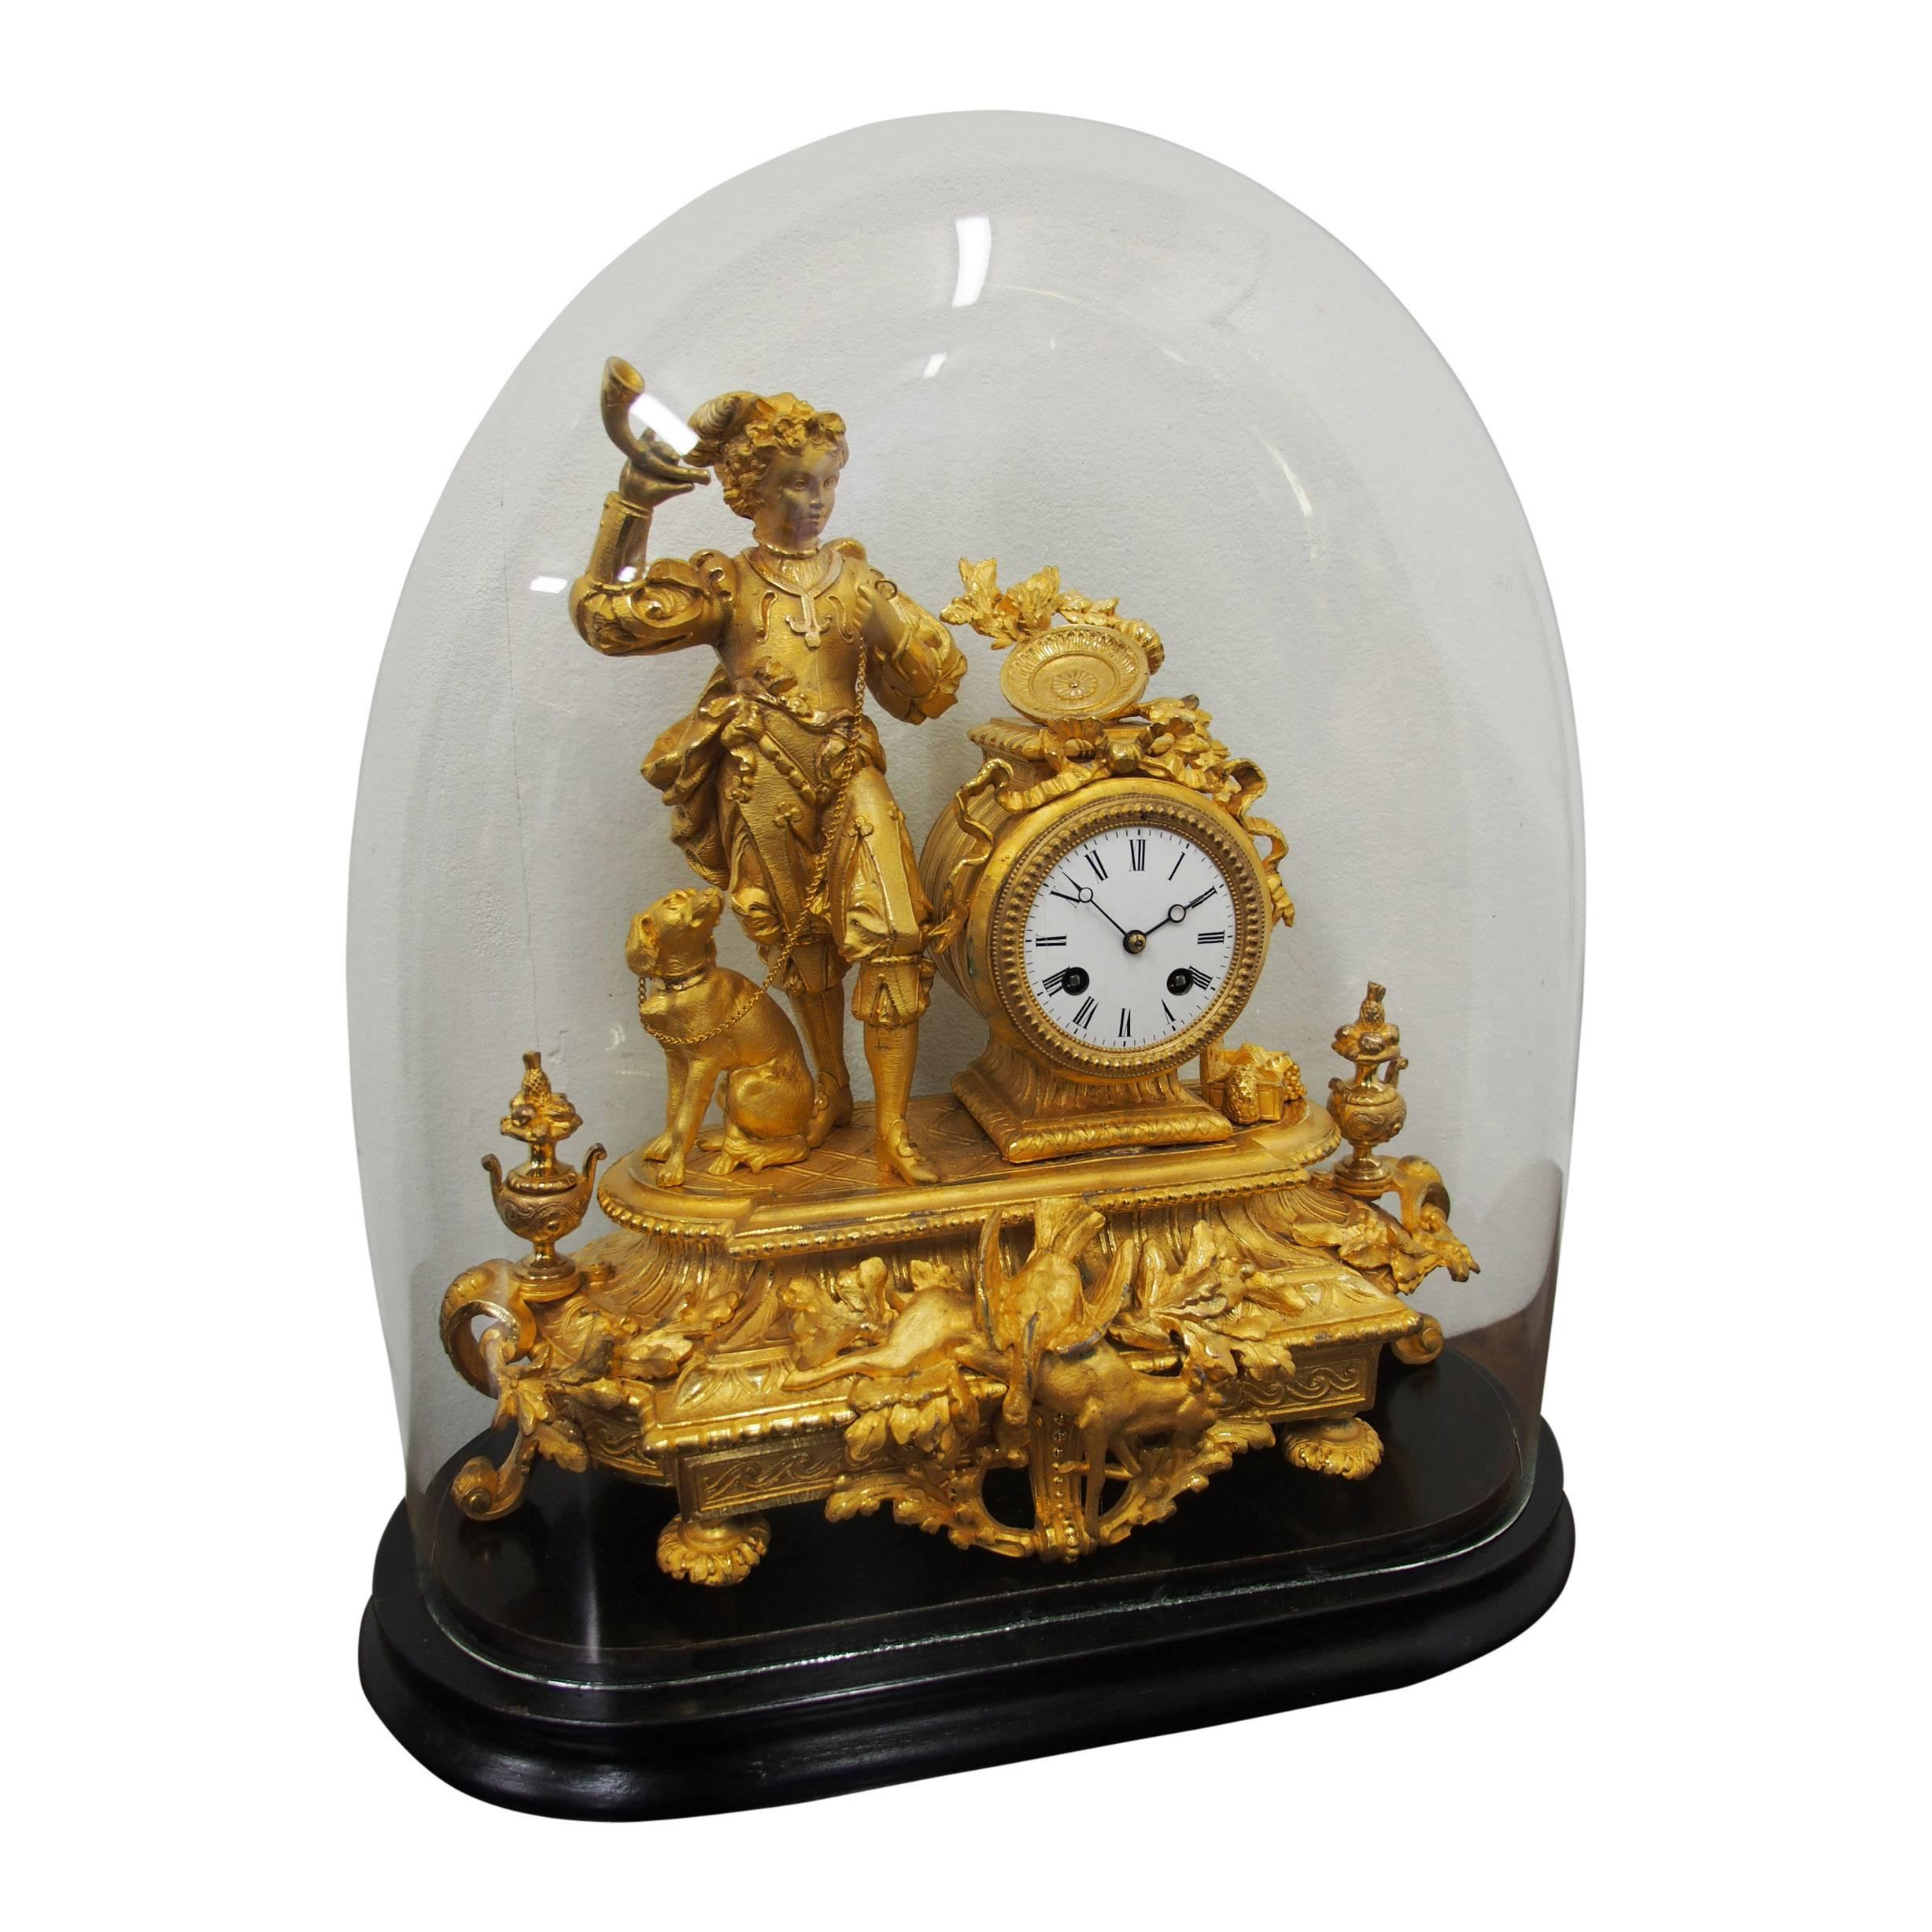 French gilded mantle clock, circa 1870. Depicting a young boy with a horn in his hand and a dog on a leash, and with a circular clock with white enamel face and Roman numerals. It is encased in a profusely cast casing with ribbons and beading at the